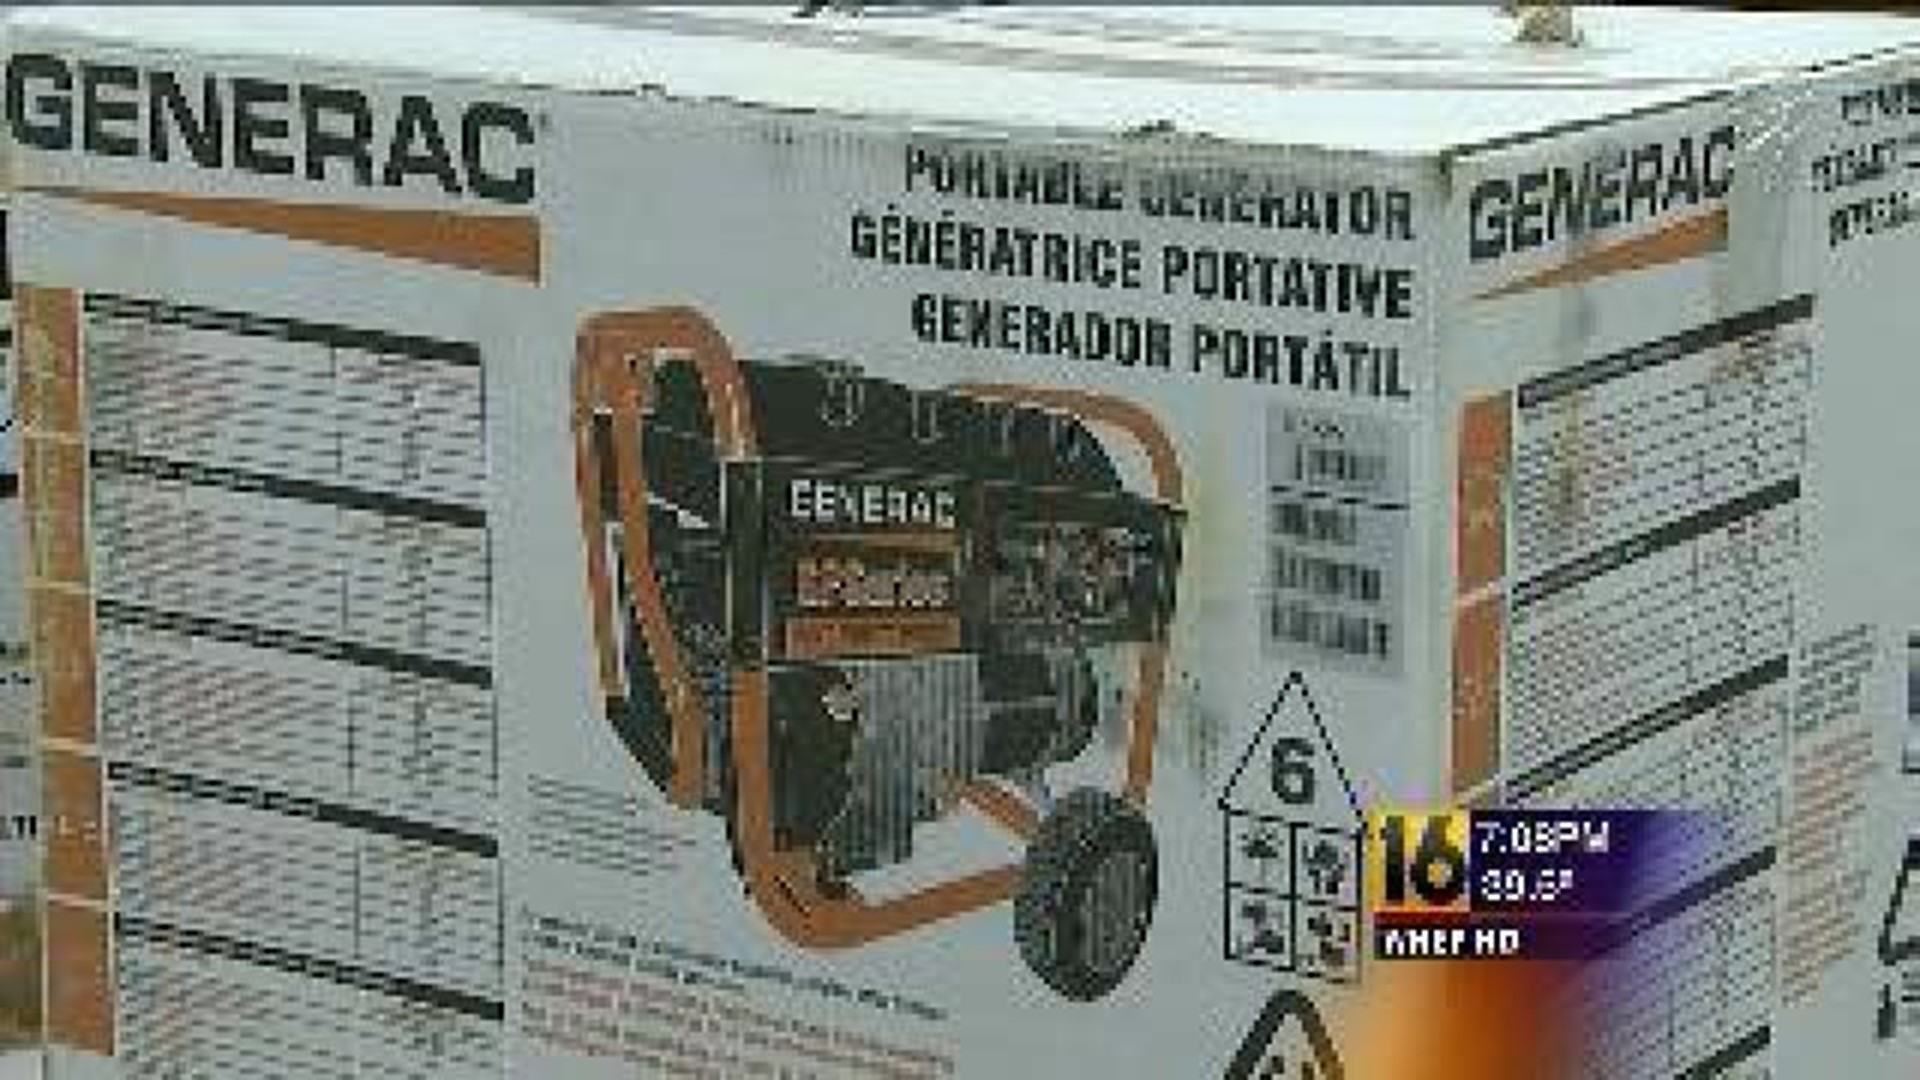 Generators for Sale, but Hard to Find